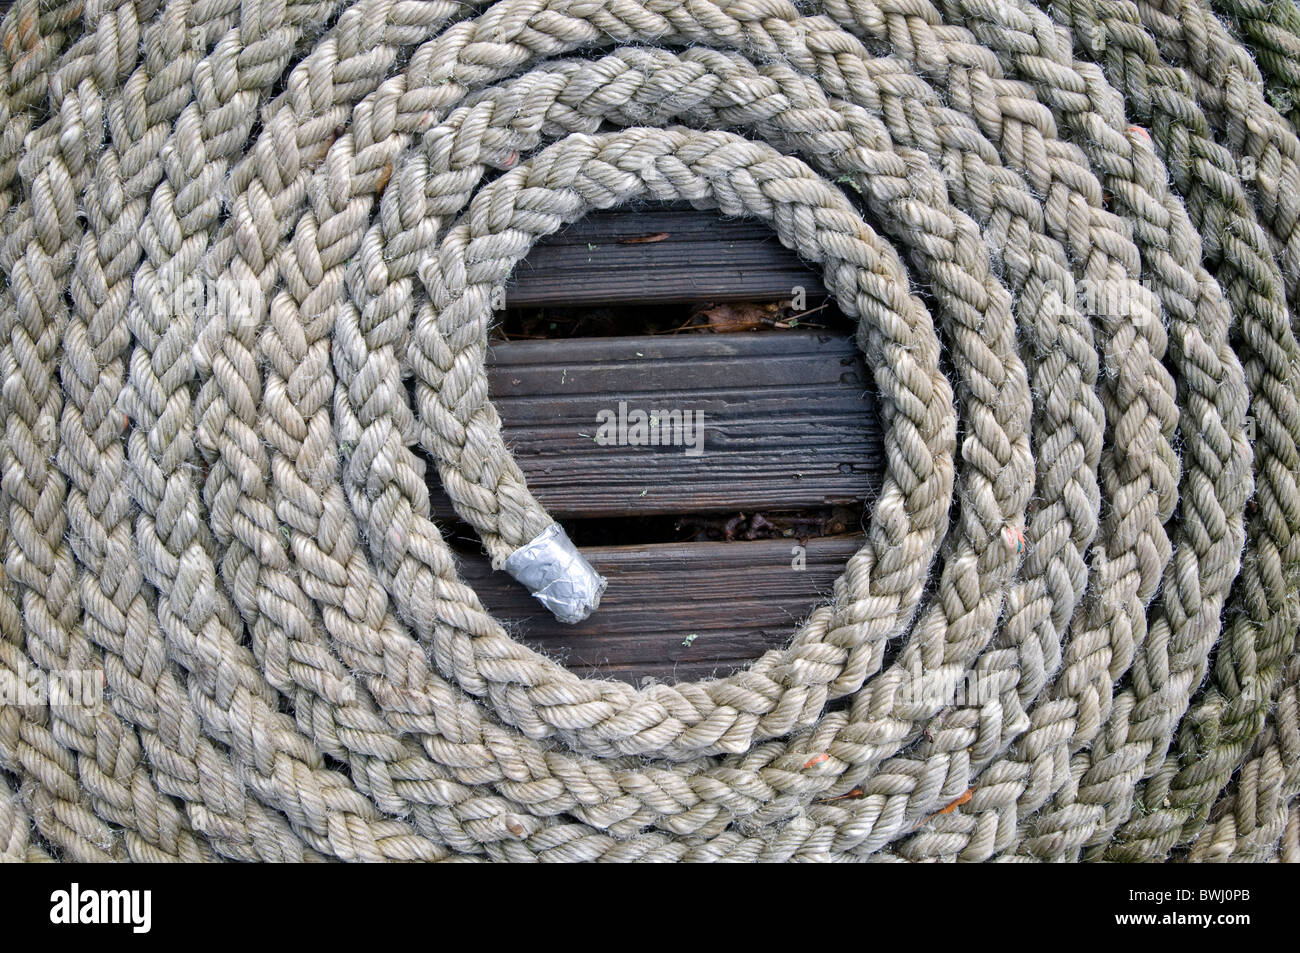 A coil of rope Stock Photo